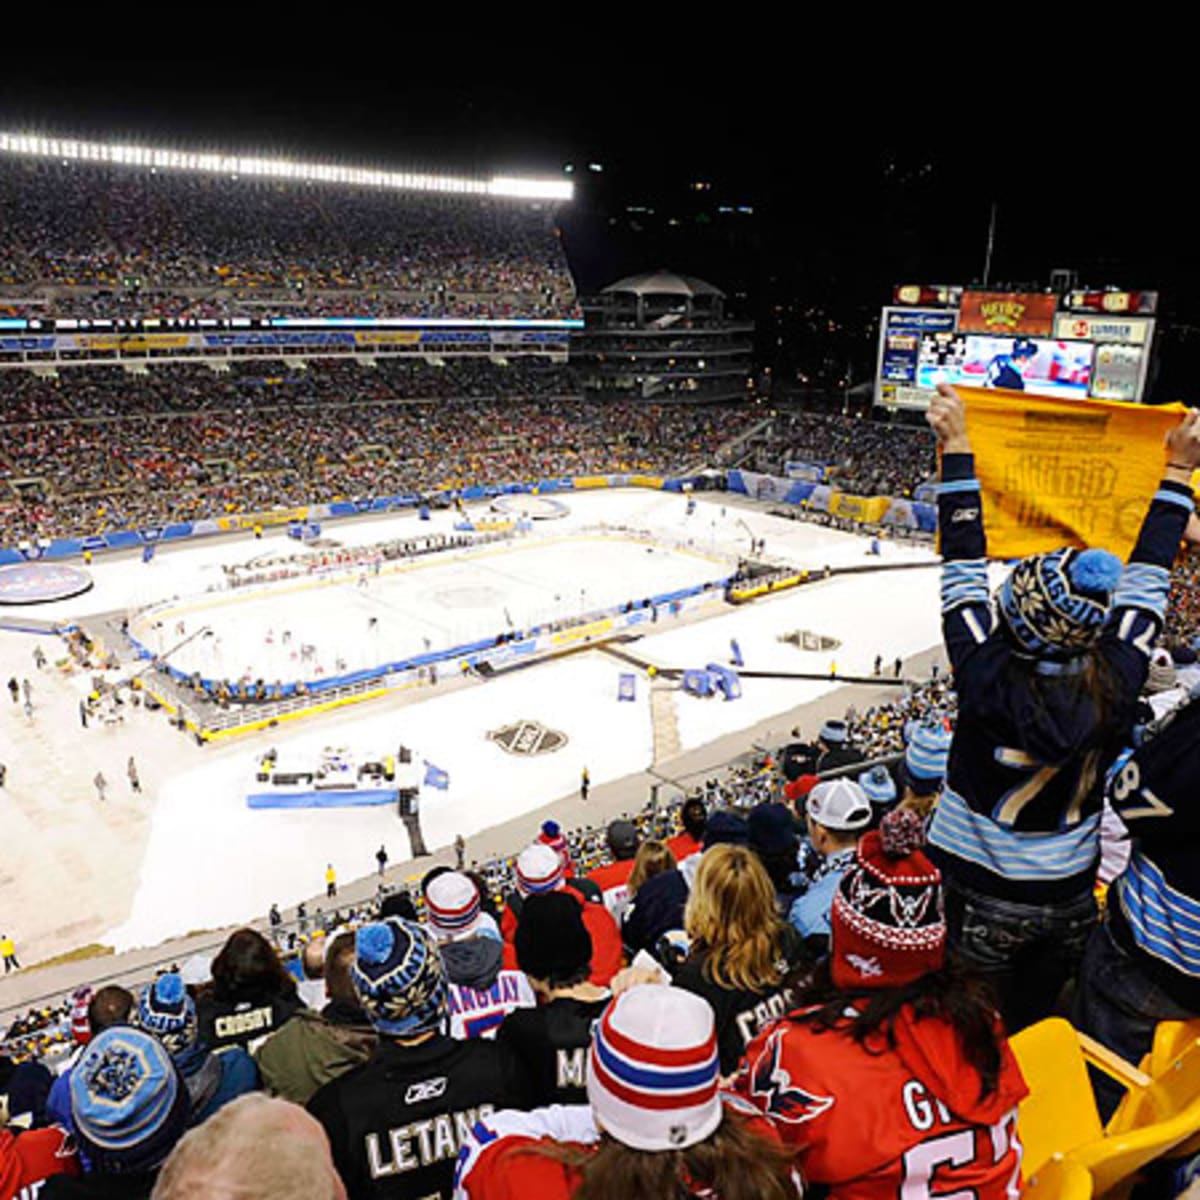 At Winter Classic, Crosby's Star Is Outshining Ovechkin's - The New York  Times